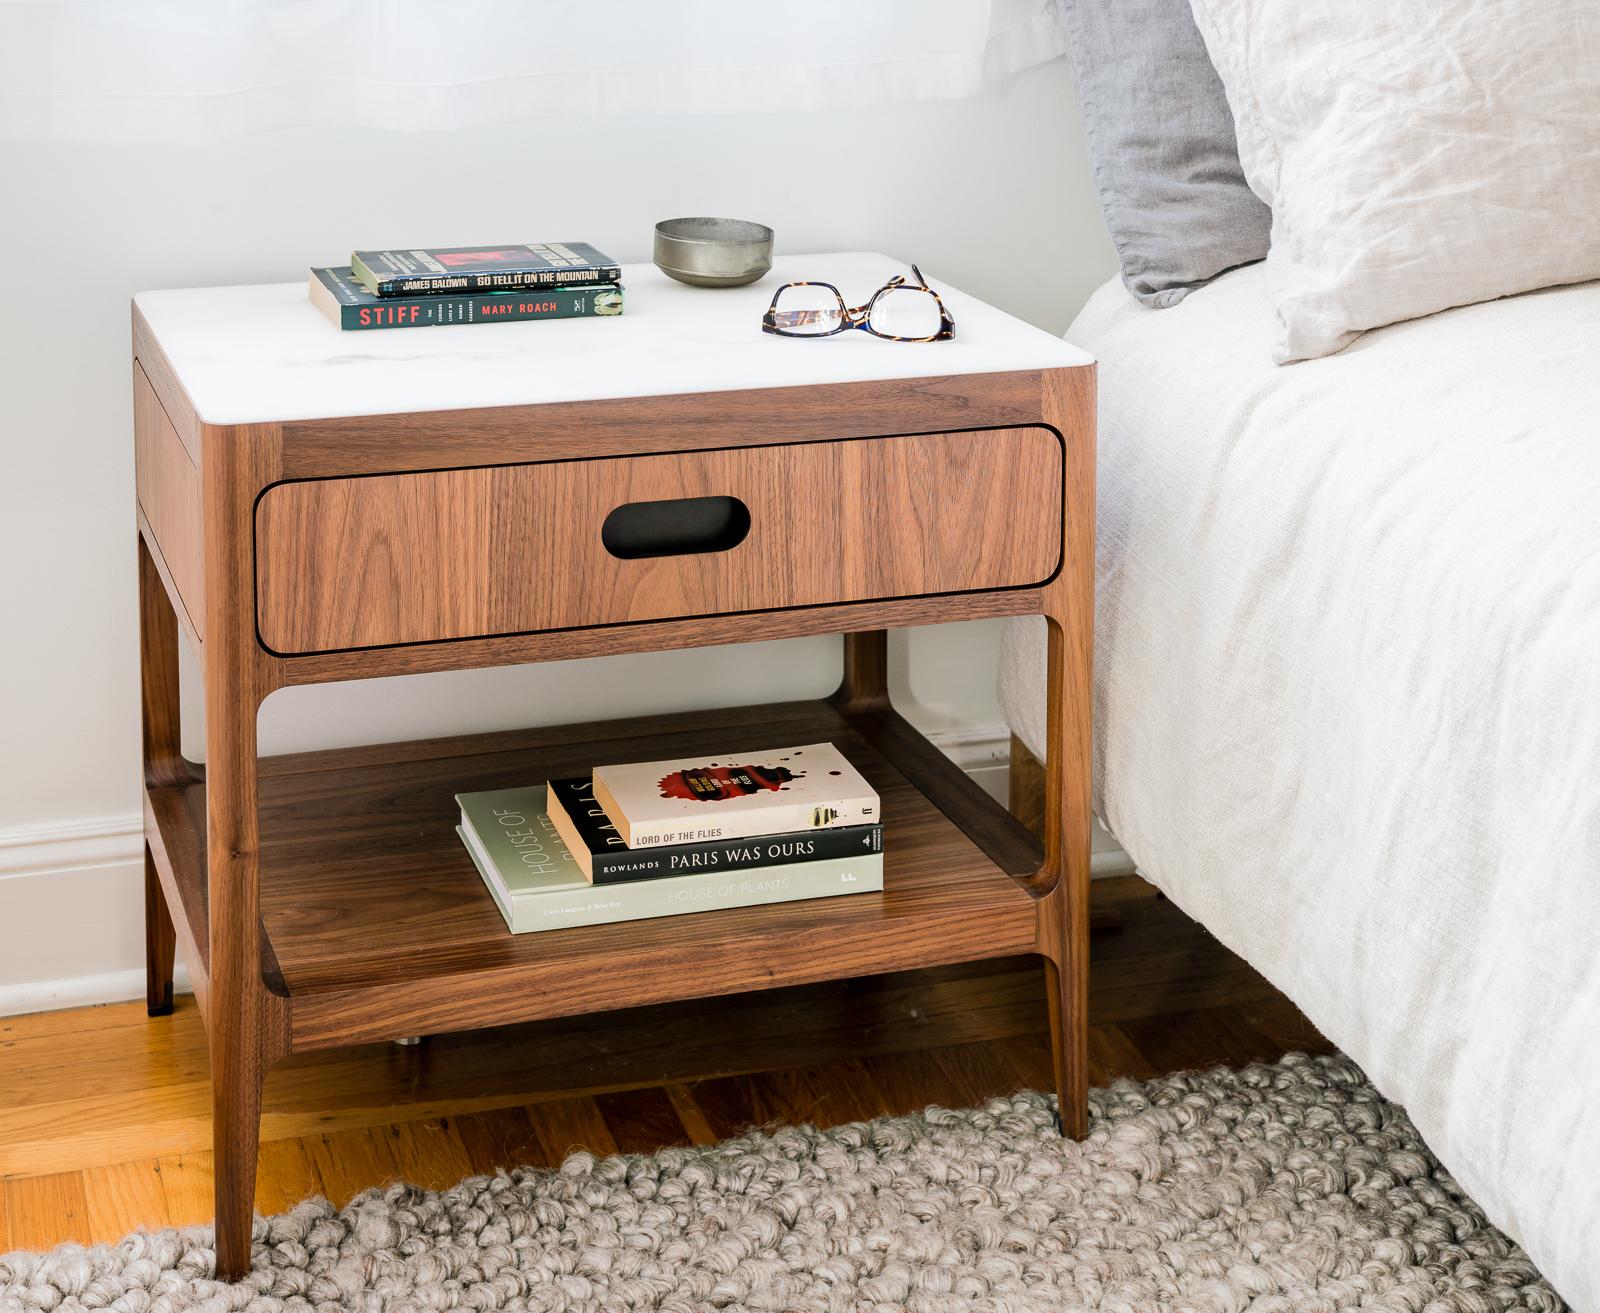 Customizable End Table or Nightstand with Drawer and Shelf by Munson Furniture (amerikanisch) im Angebot